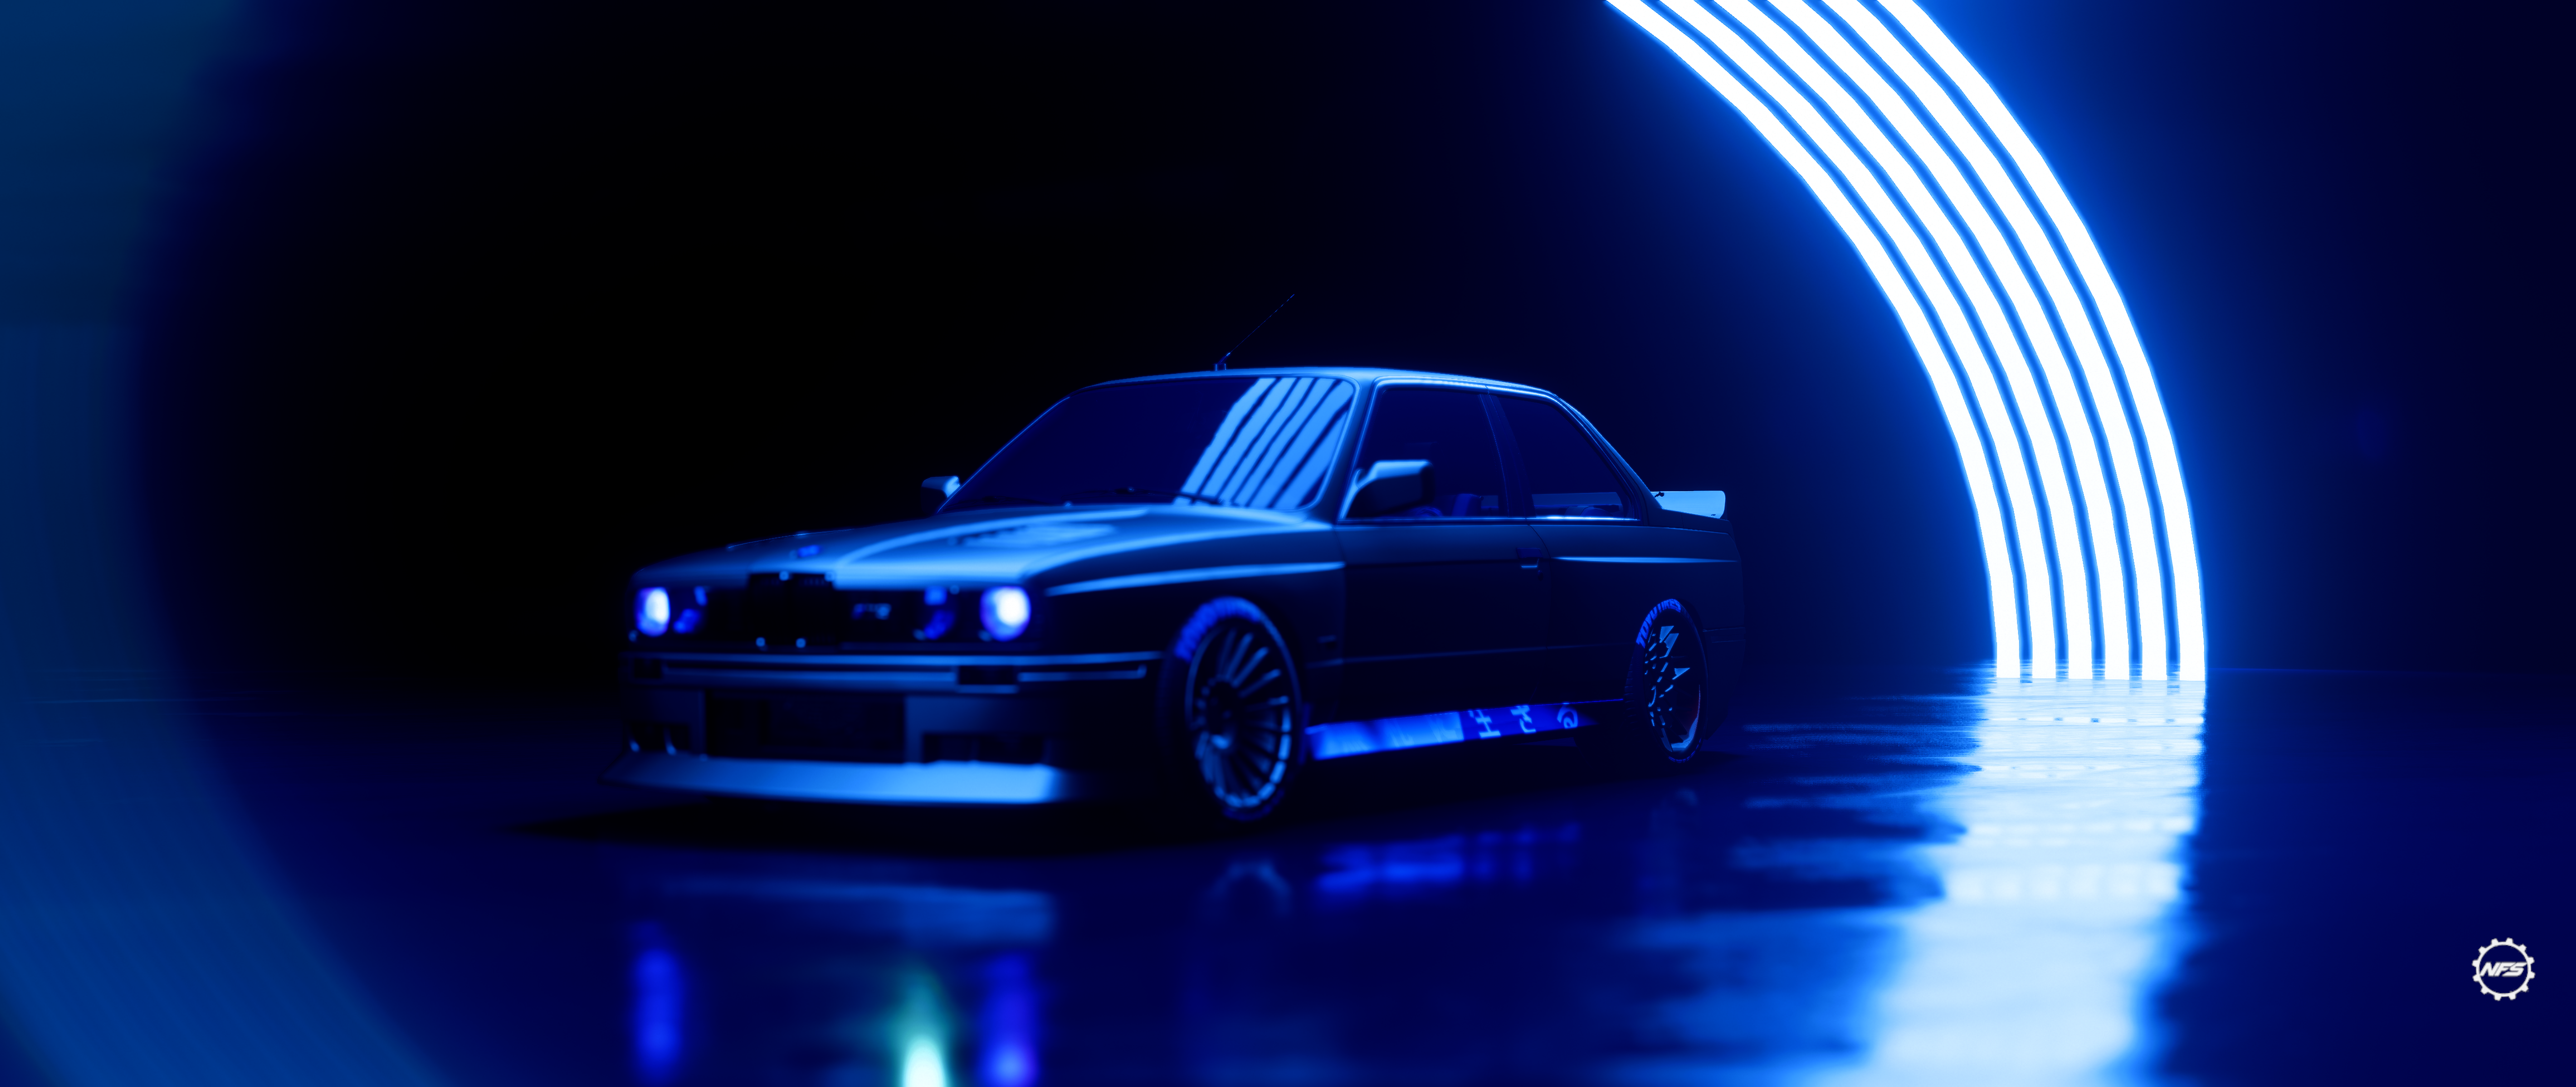 Need For Speed Heat Need For Speed BMW M BMW BMW M3 Digital Ultra High Res Car Vehicle 5120x2160